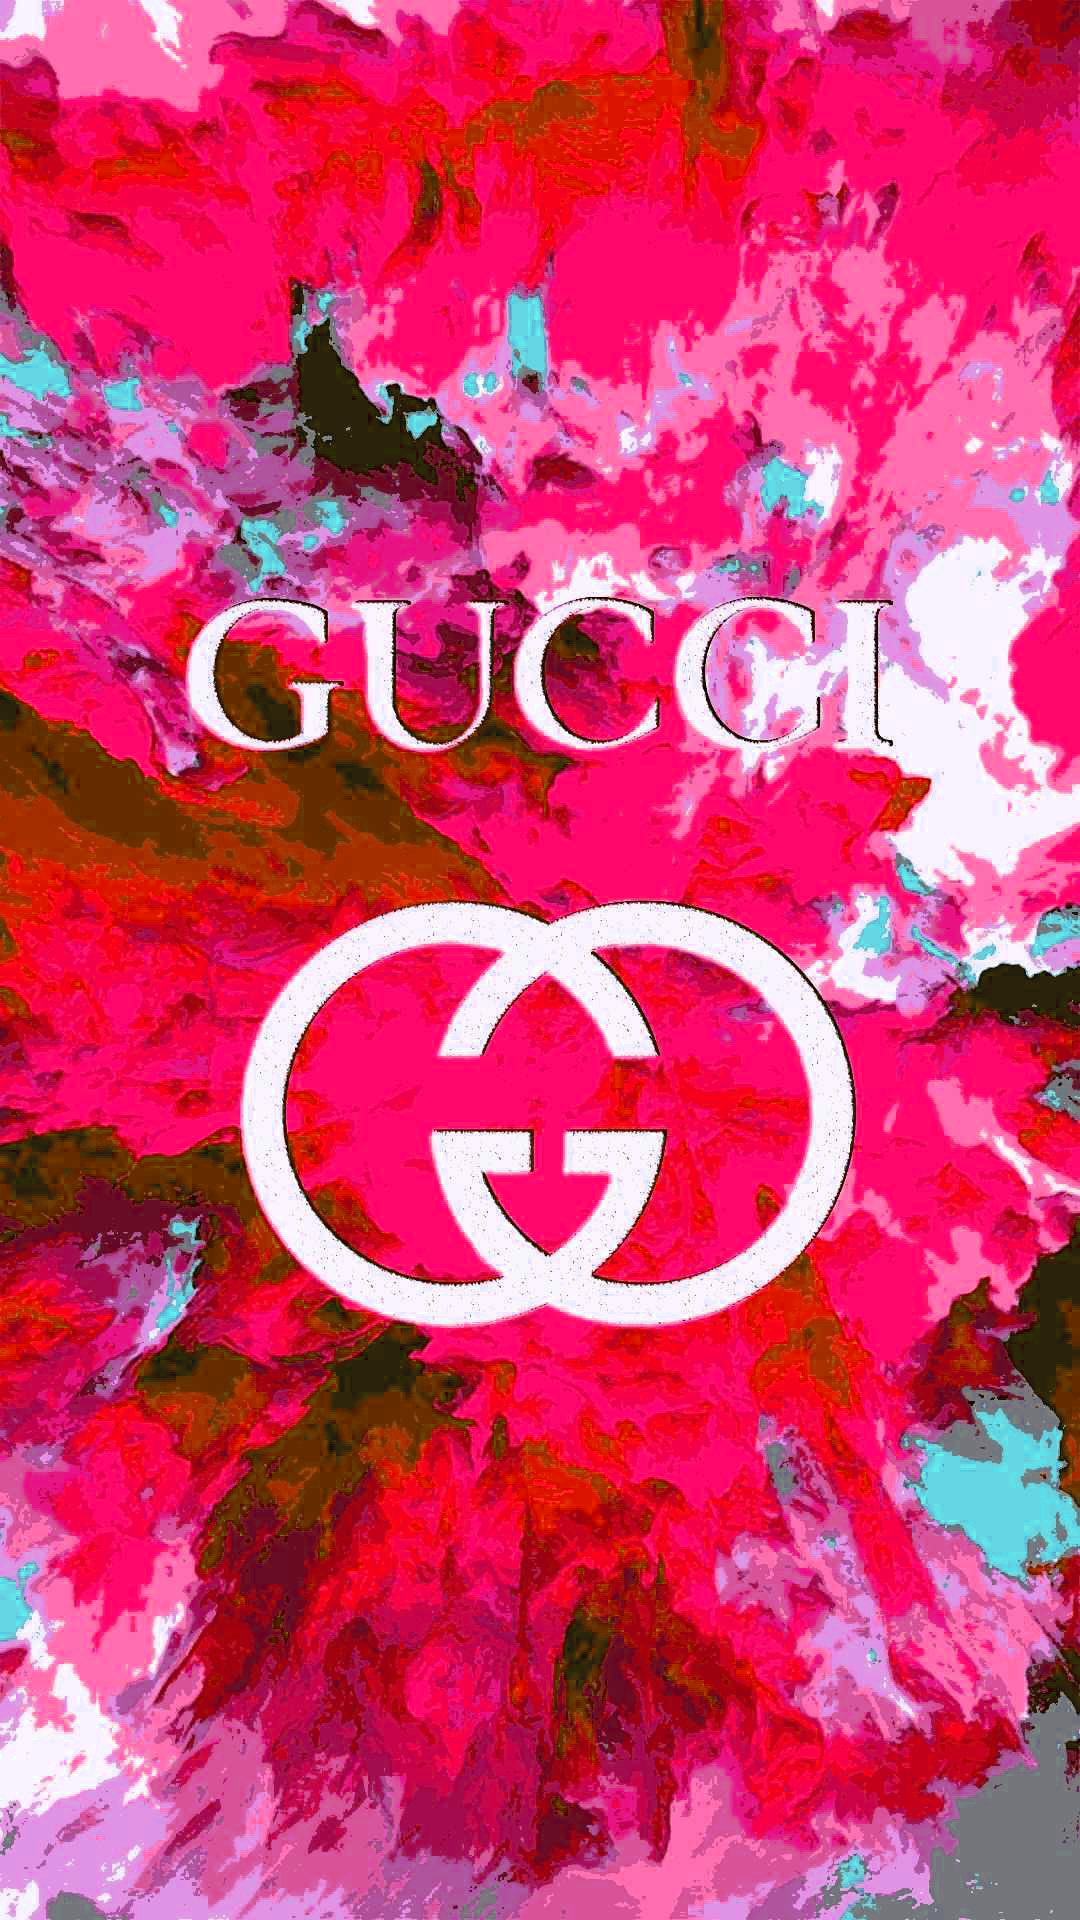 Gucci Wallpaper Discover more Background, Gold, Iphone, Lock